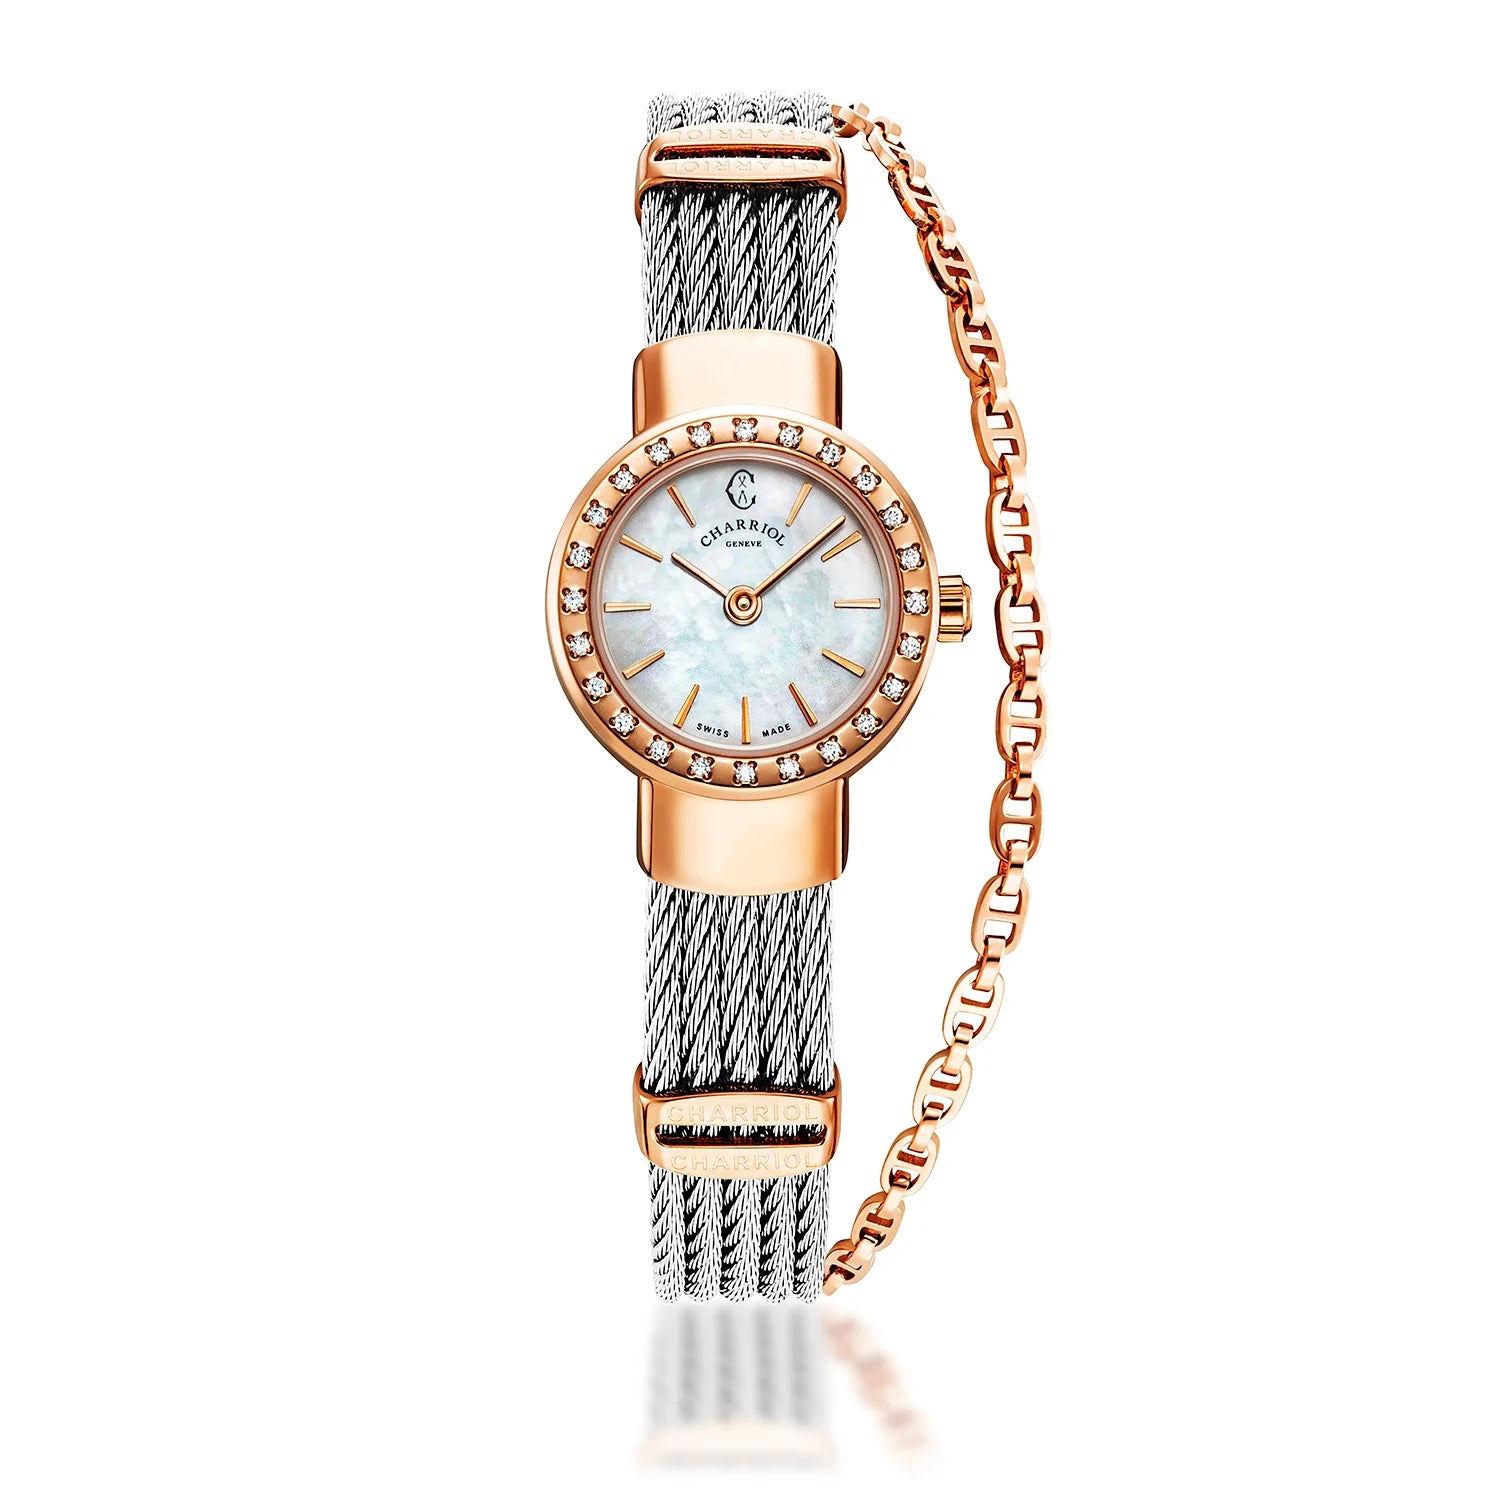 ST TROPEZ, 20MM, QUARTZ CALIBRE, MOTHER-OF-PEARL DIAL, STEEL ROSE GOLD PVD WITH 24 DIAMONDS BEZEL, STEEL CABLE BRACELET - Charriol Geneve -  Watch